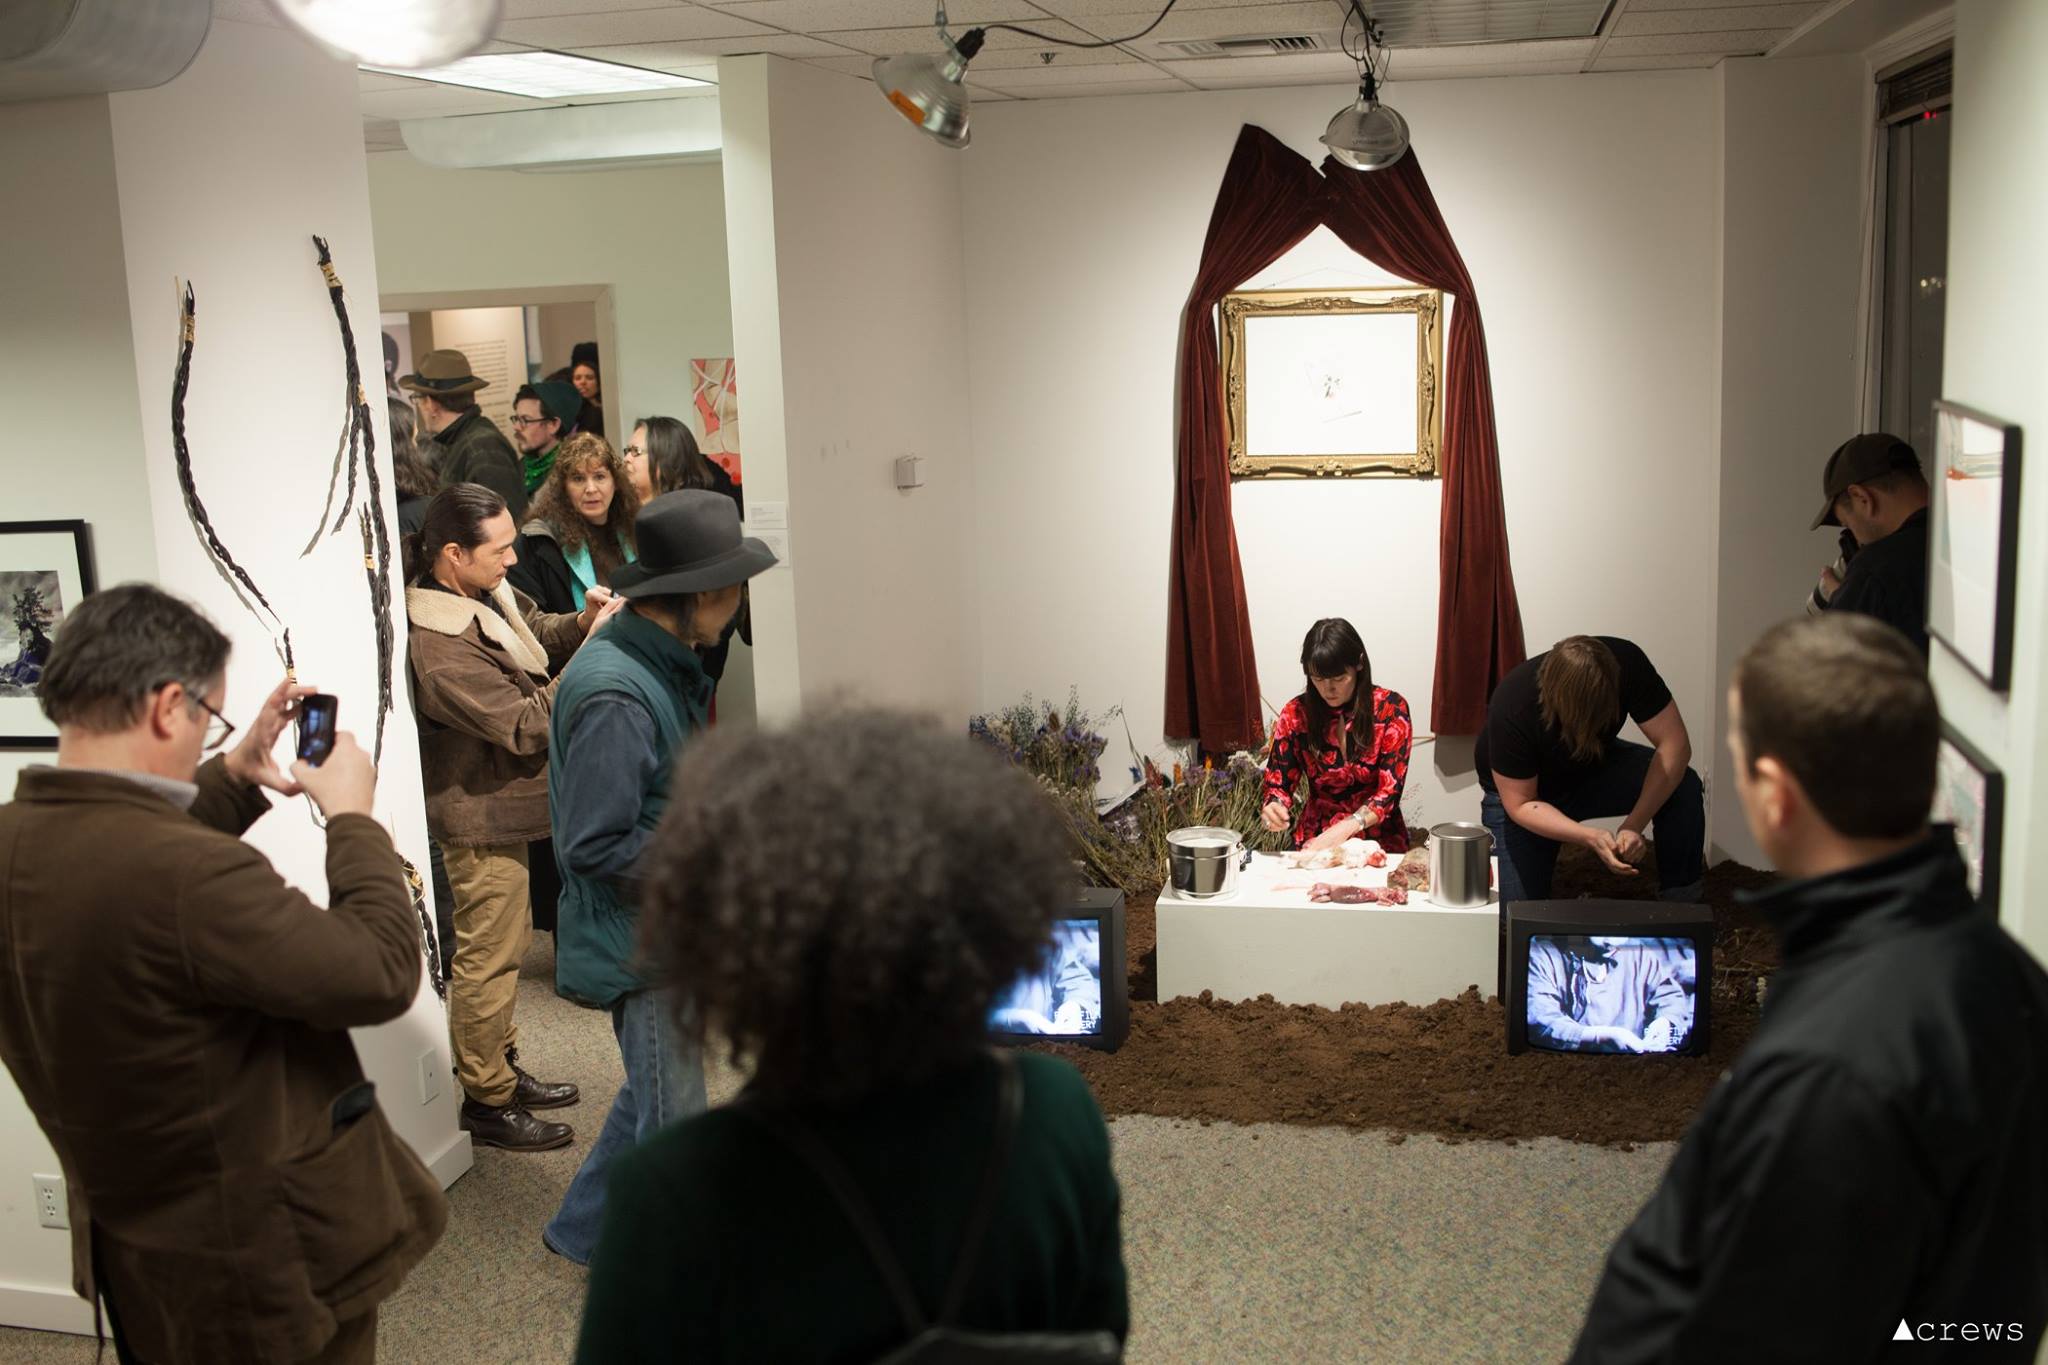 A crowd watches two performers in an art gallery. There is dirt on the floor and video monitors flanking a white pedestal with metal buckets and skinned rabbits. Behind, a gold frame on the wall is draped with red velvet curtains.